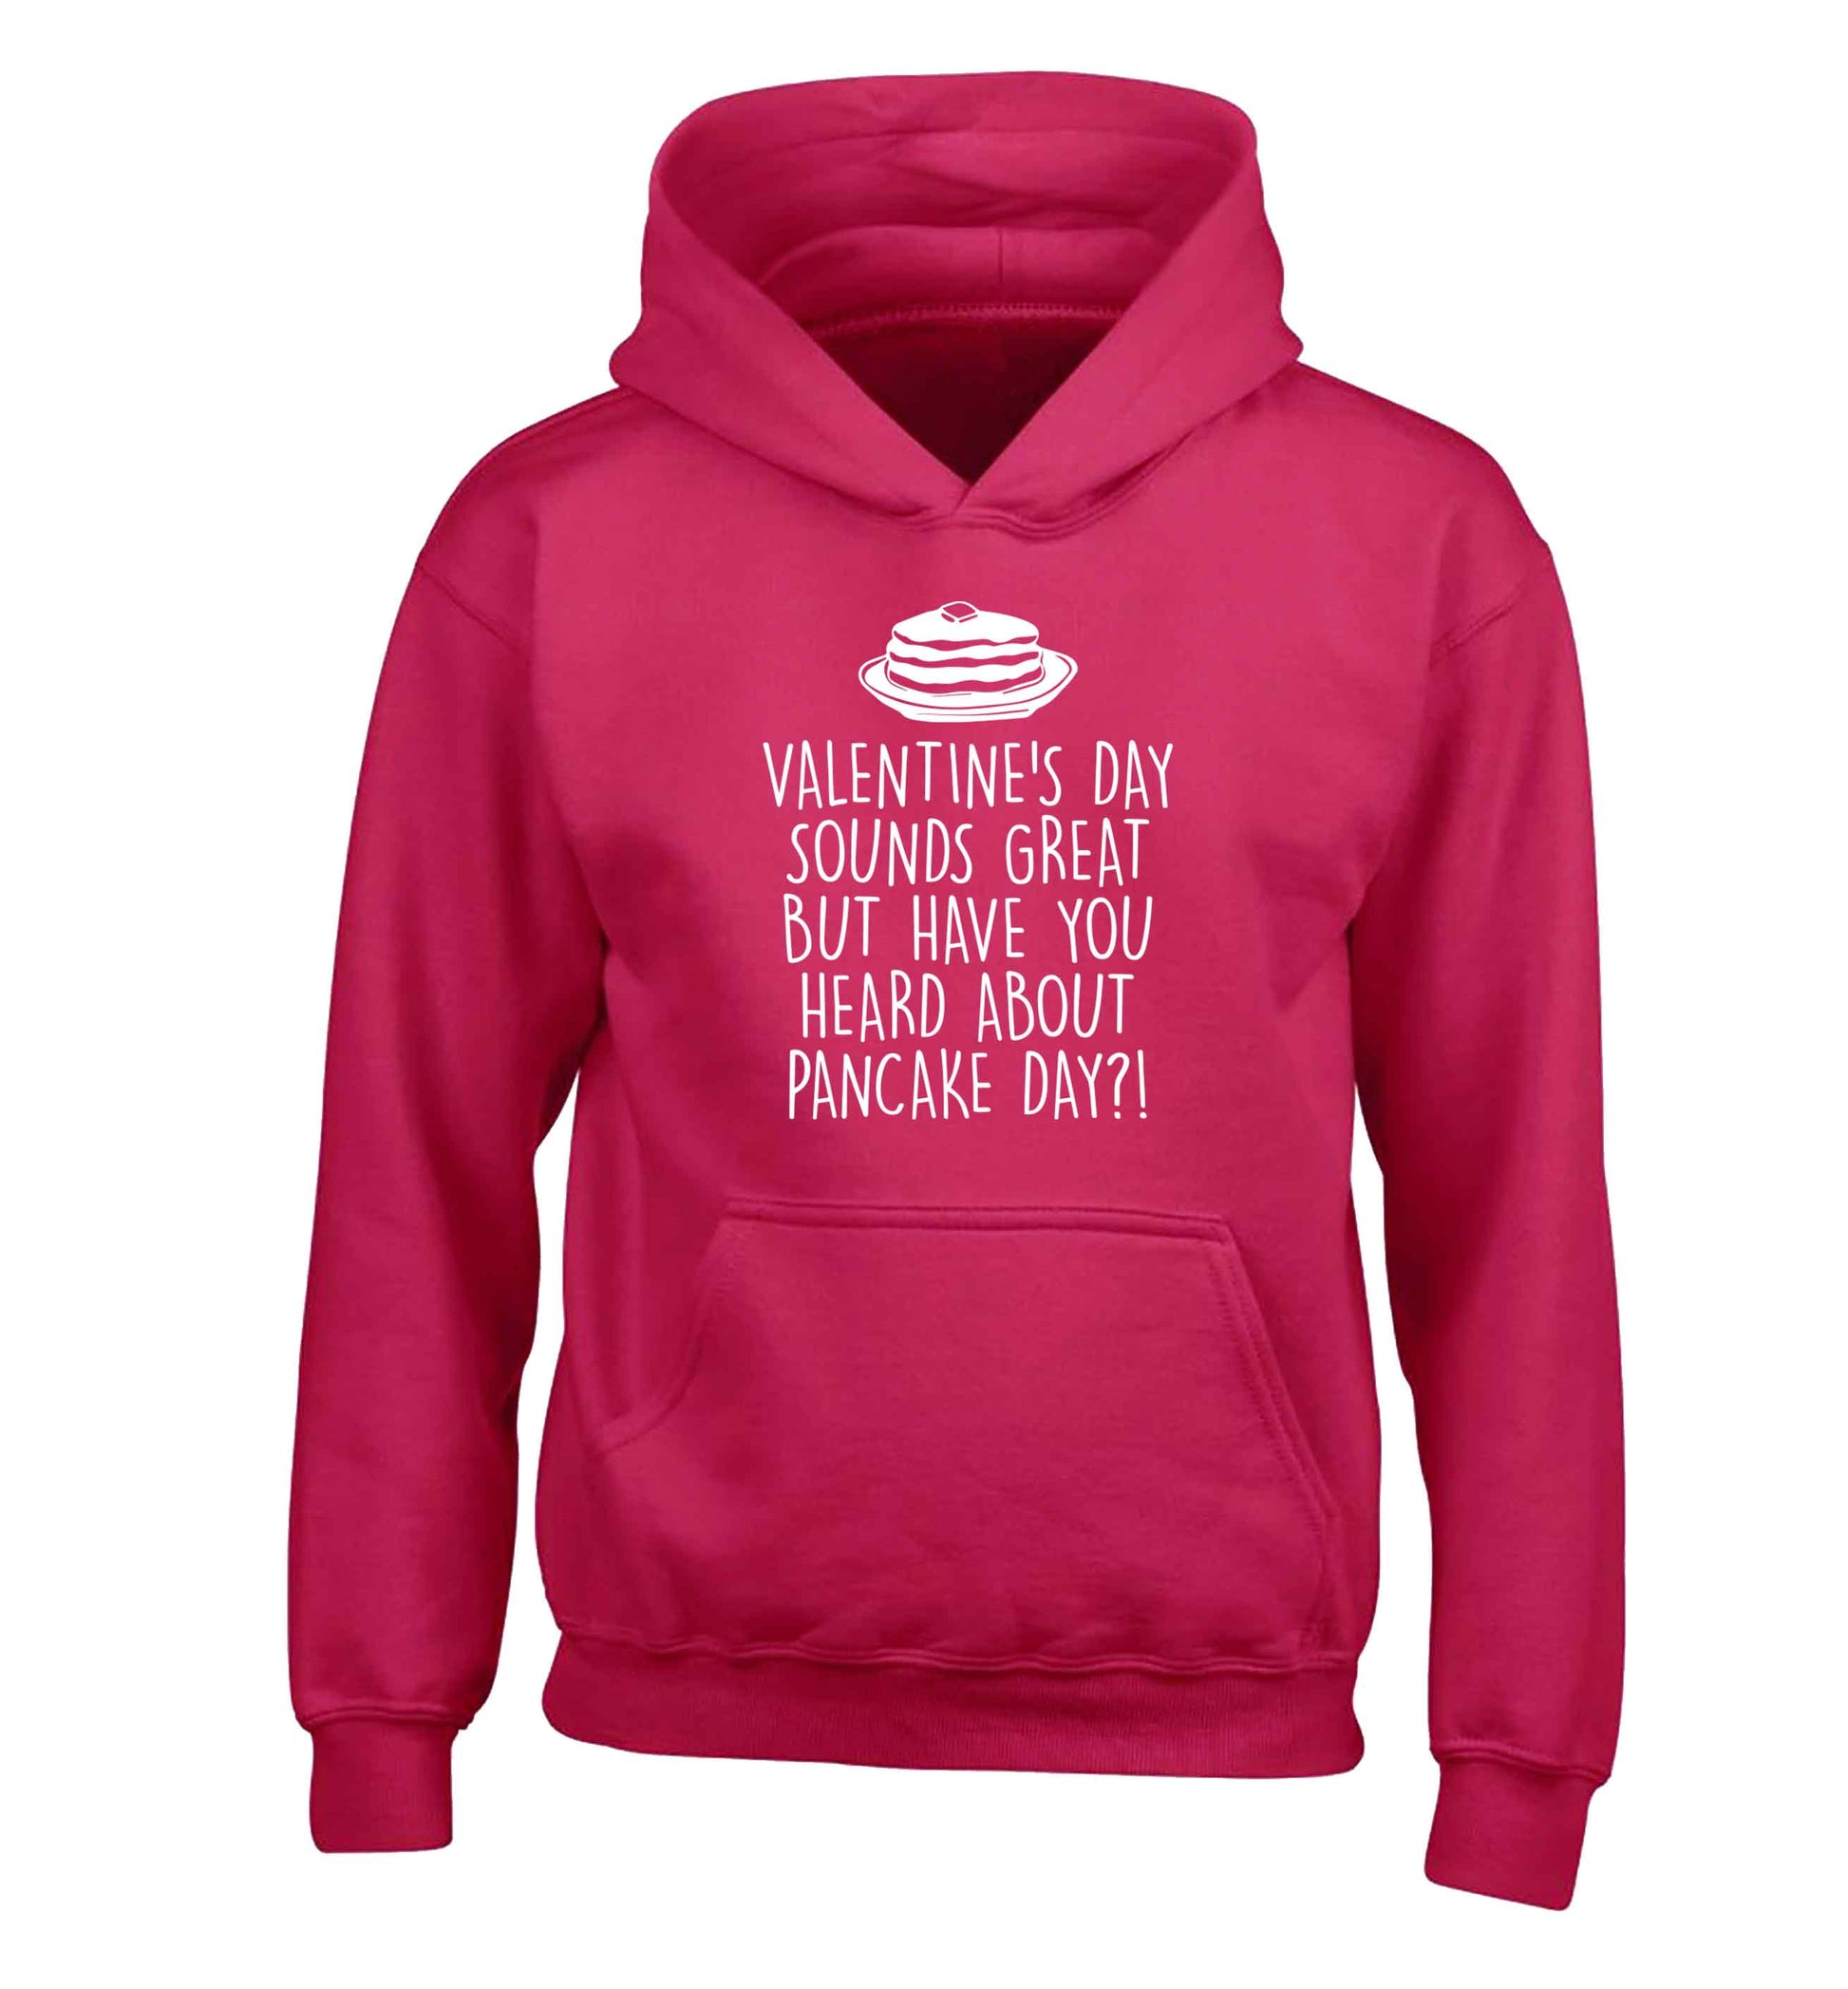 Valentine's day sounds great but have you heard about pancake day?! children's pink hoodie 12-13 Years